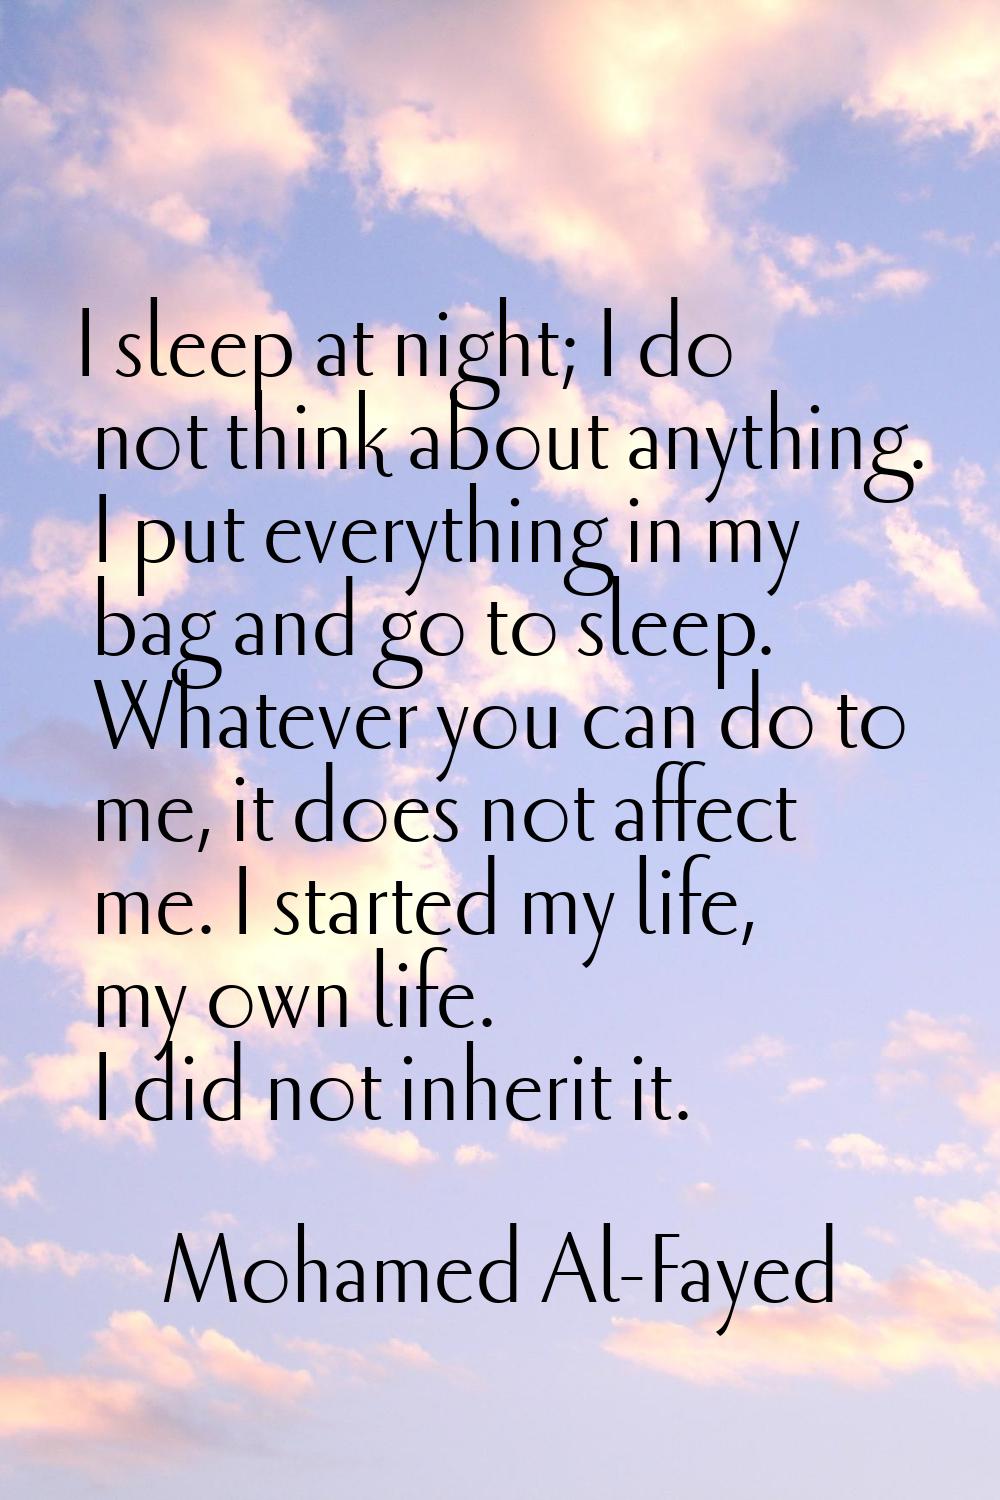 I sleep at night; I do not think about anything. I put everything in my bag and go to sleep. Whatev